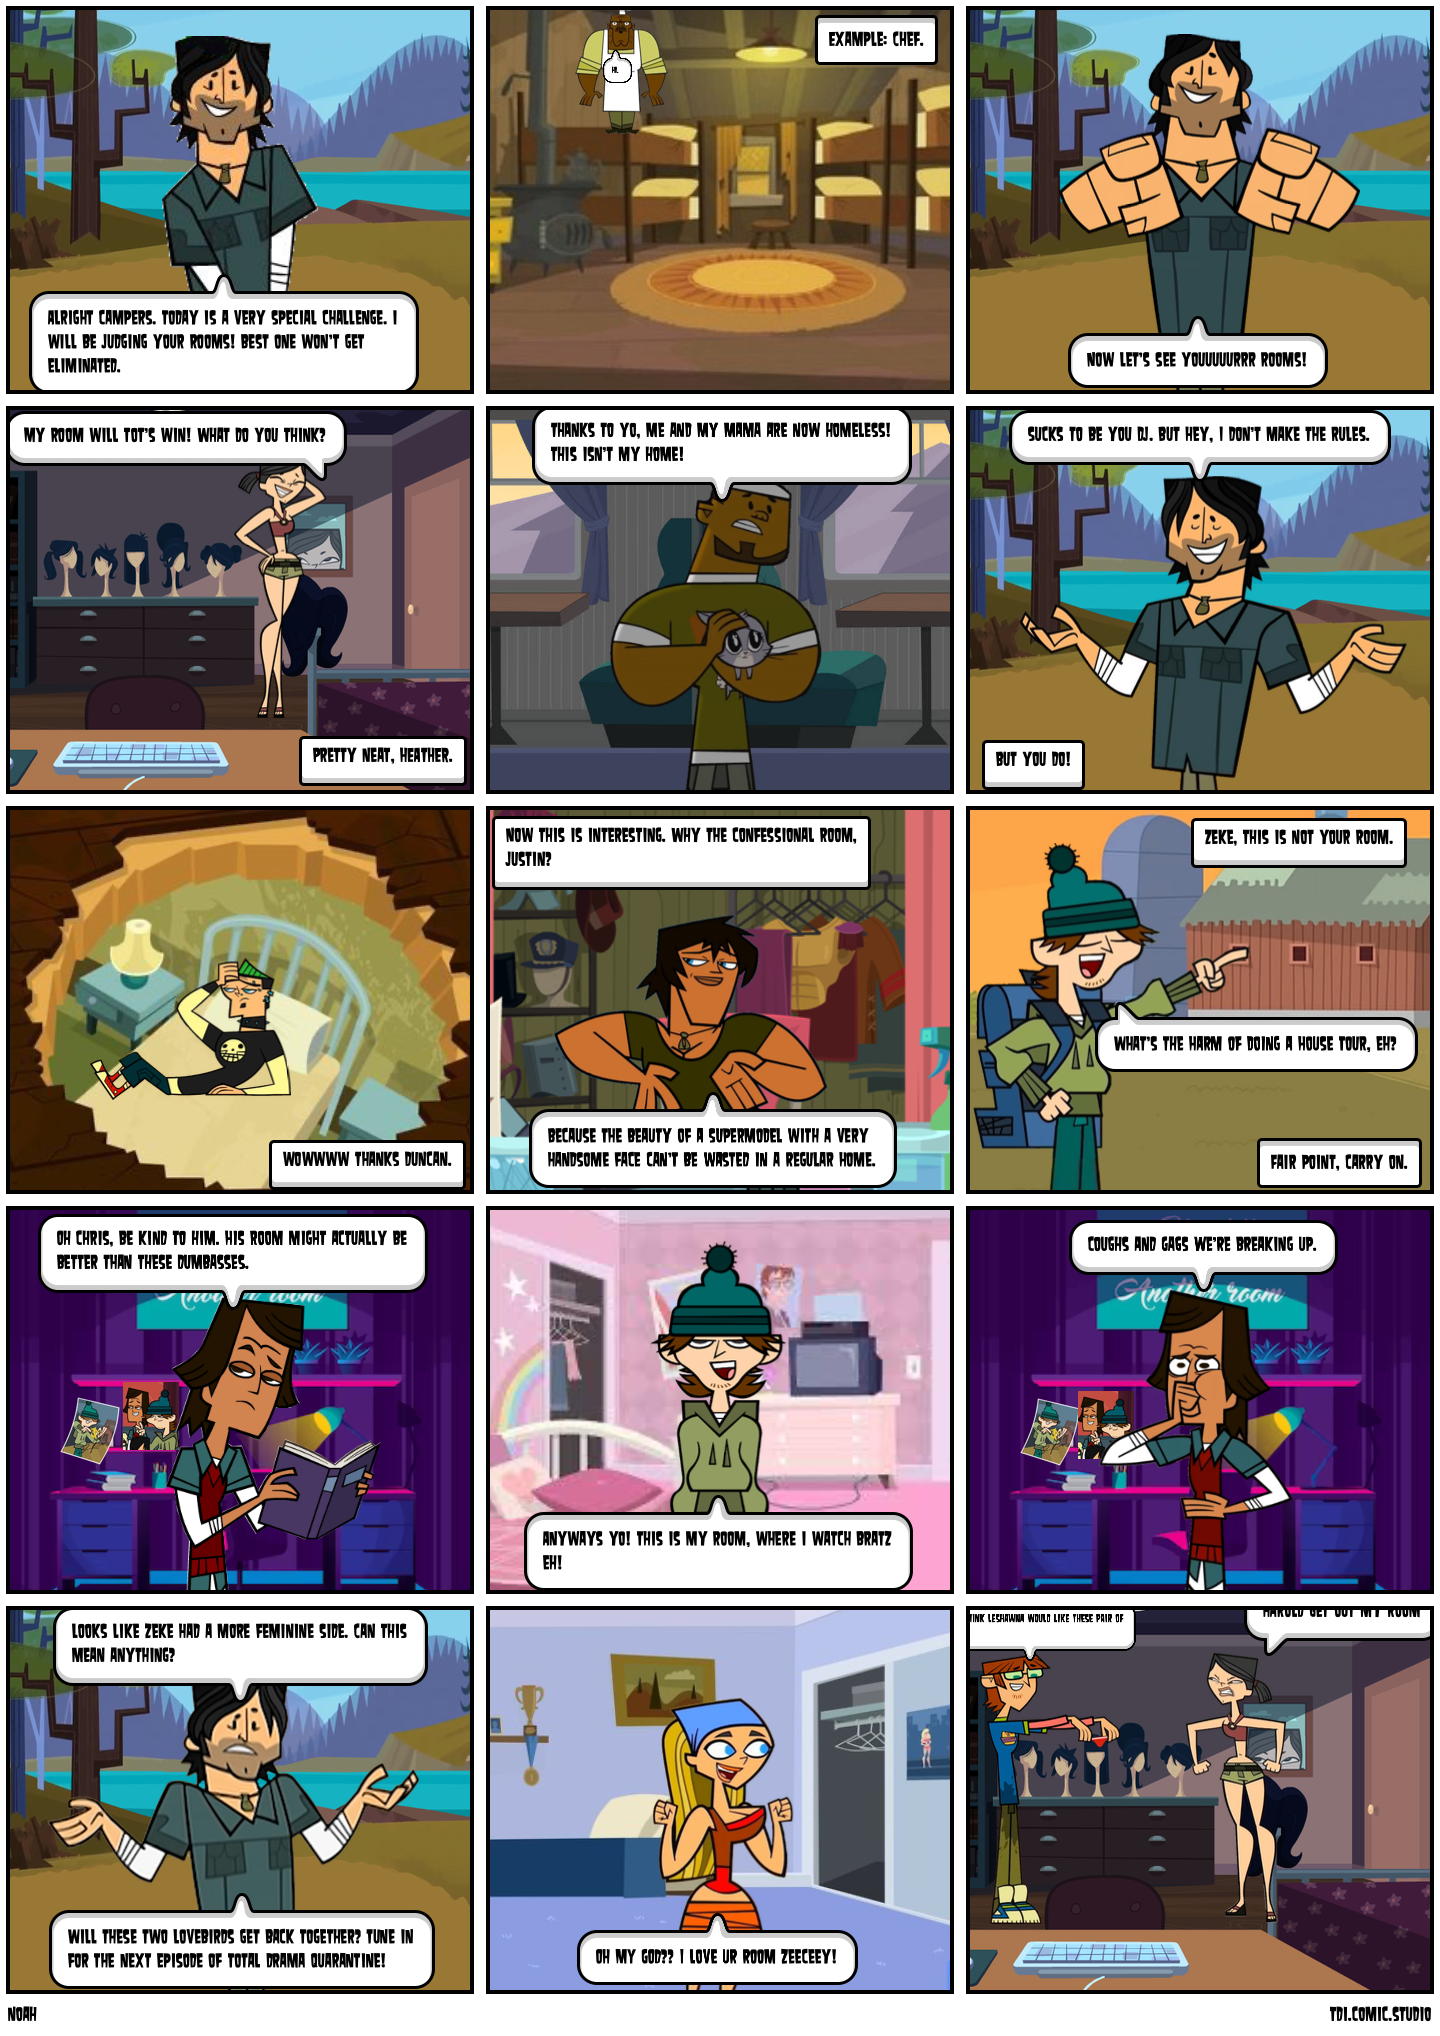 How to go on Total Drama Comic Studio make Comics and memes With